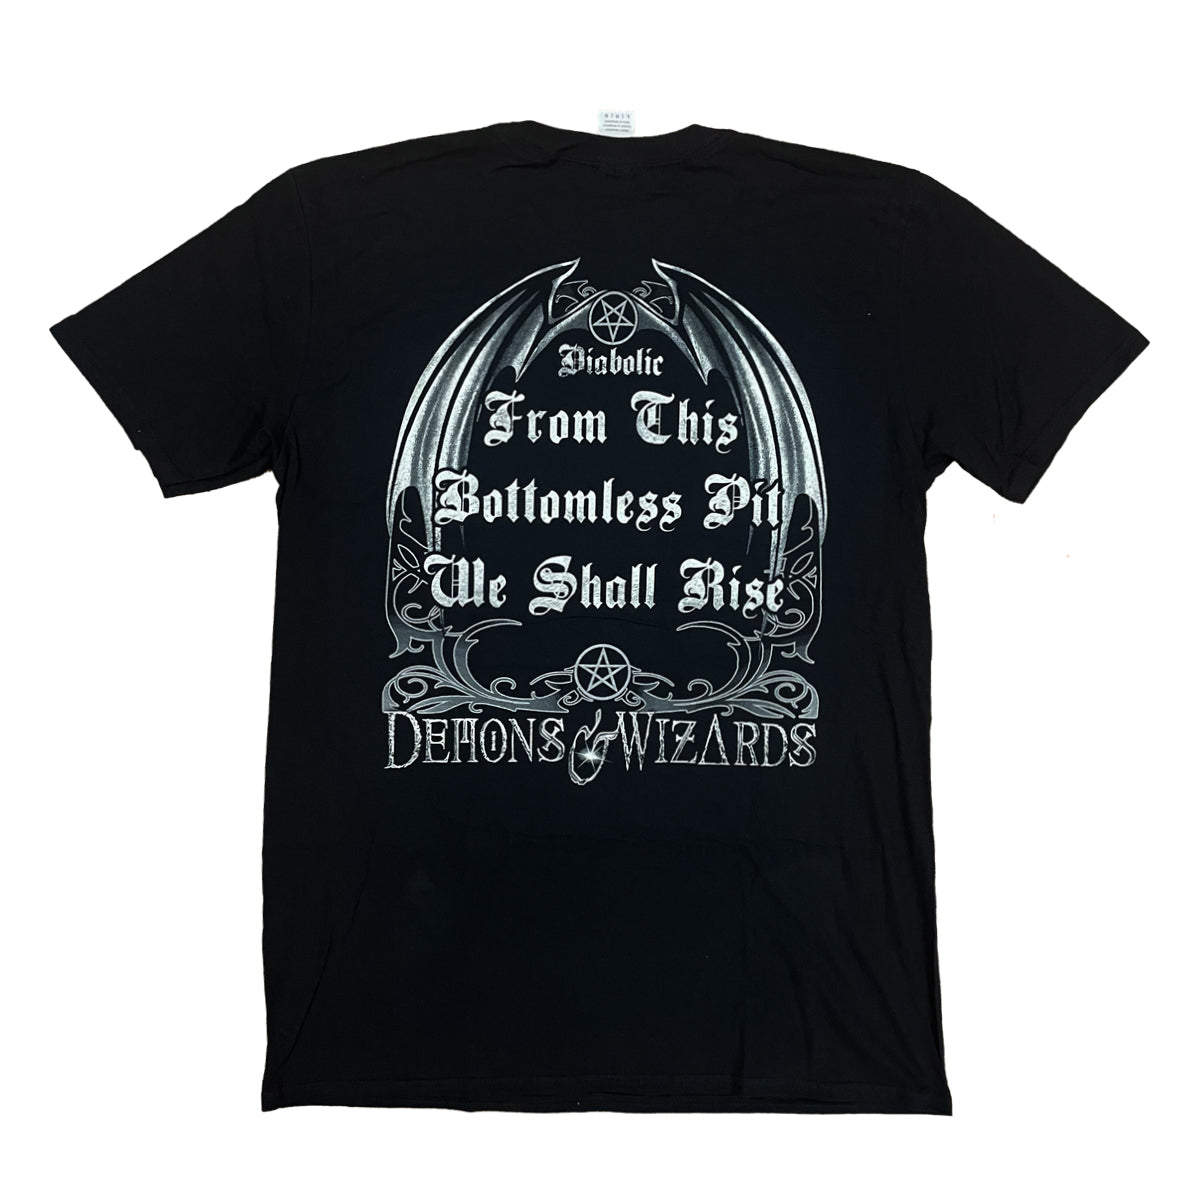 DEMONS & WIZARDS We Shall Rise T-Shirt